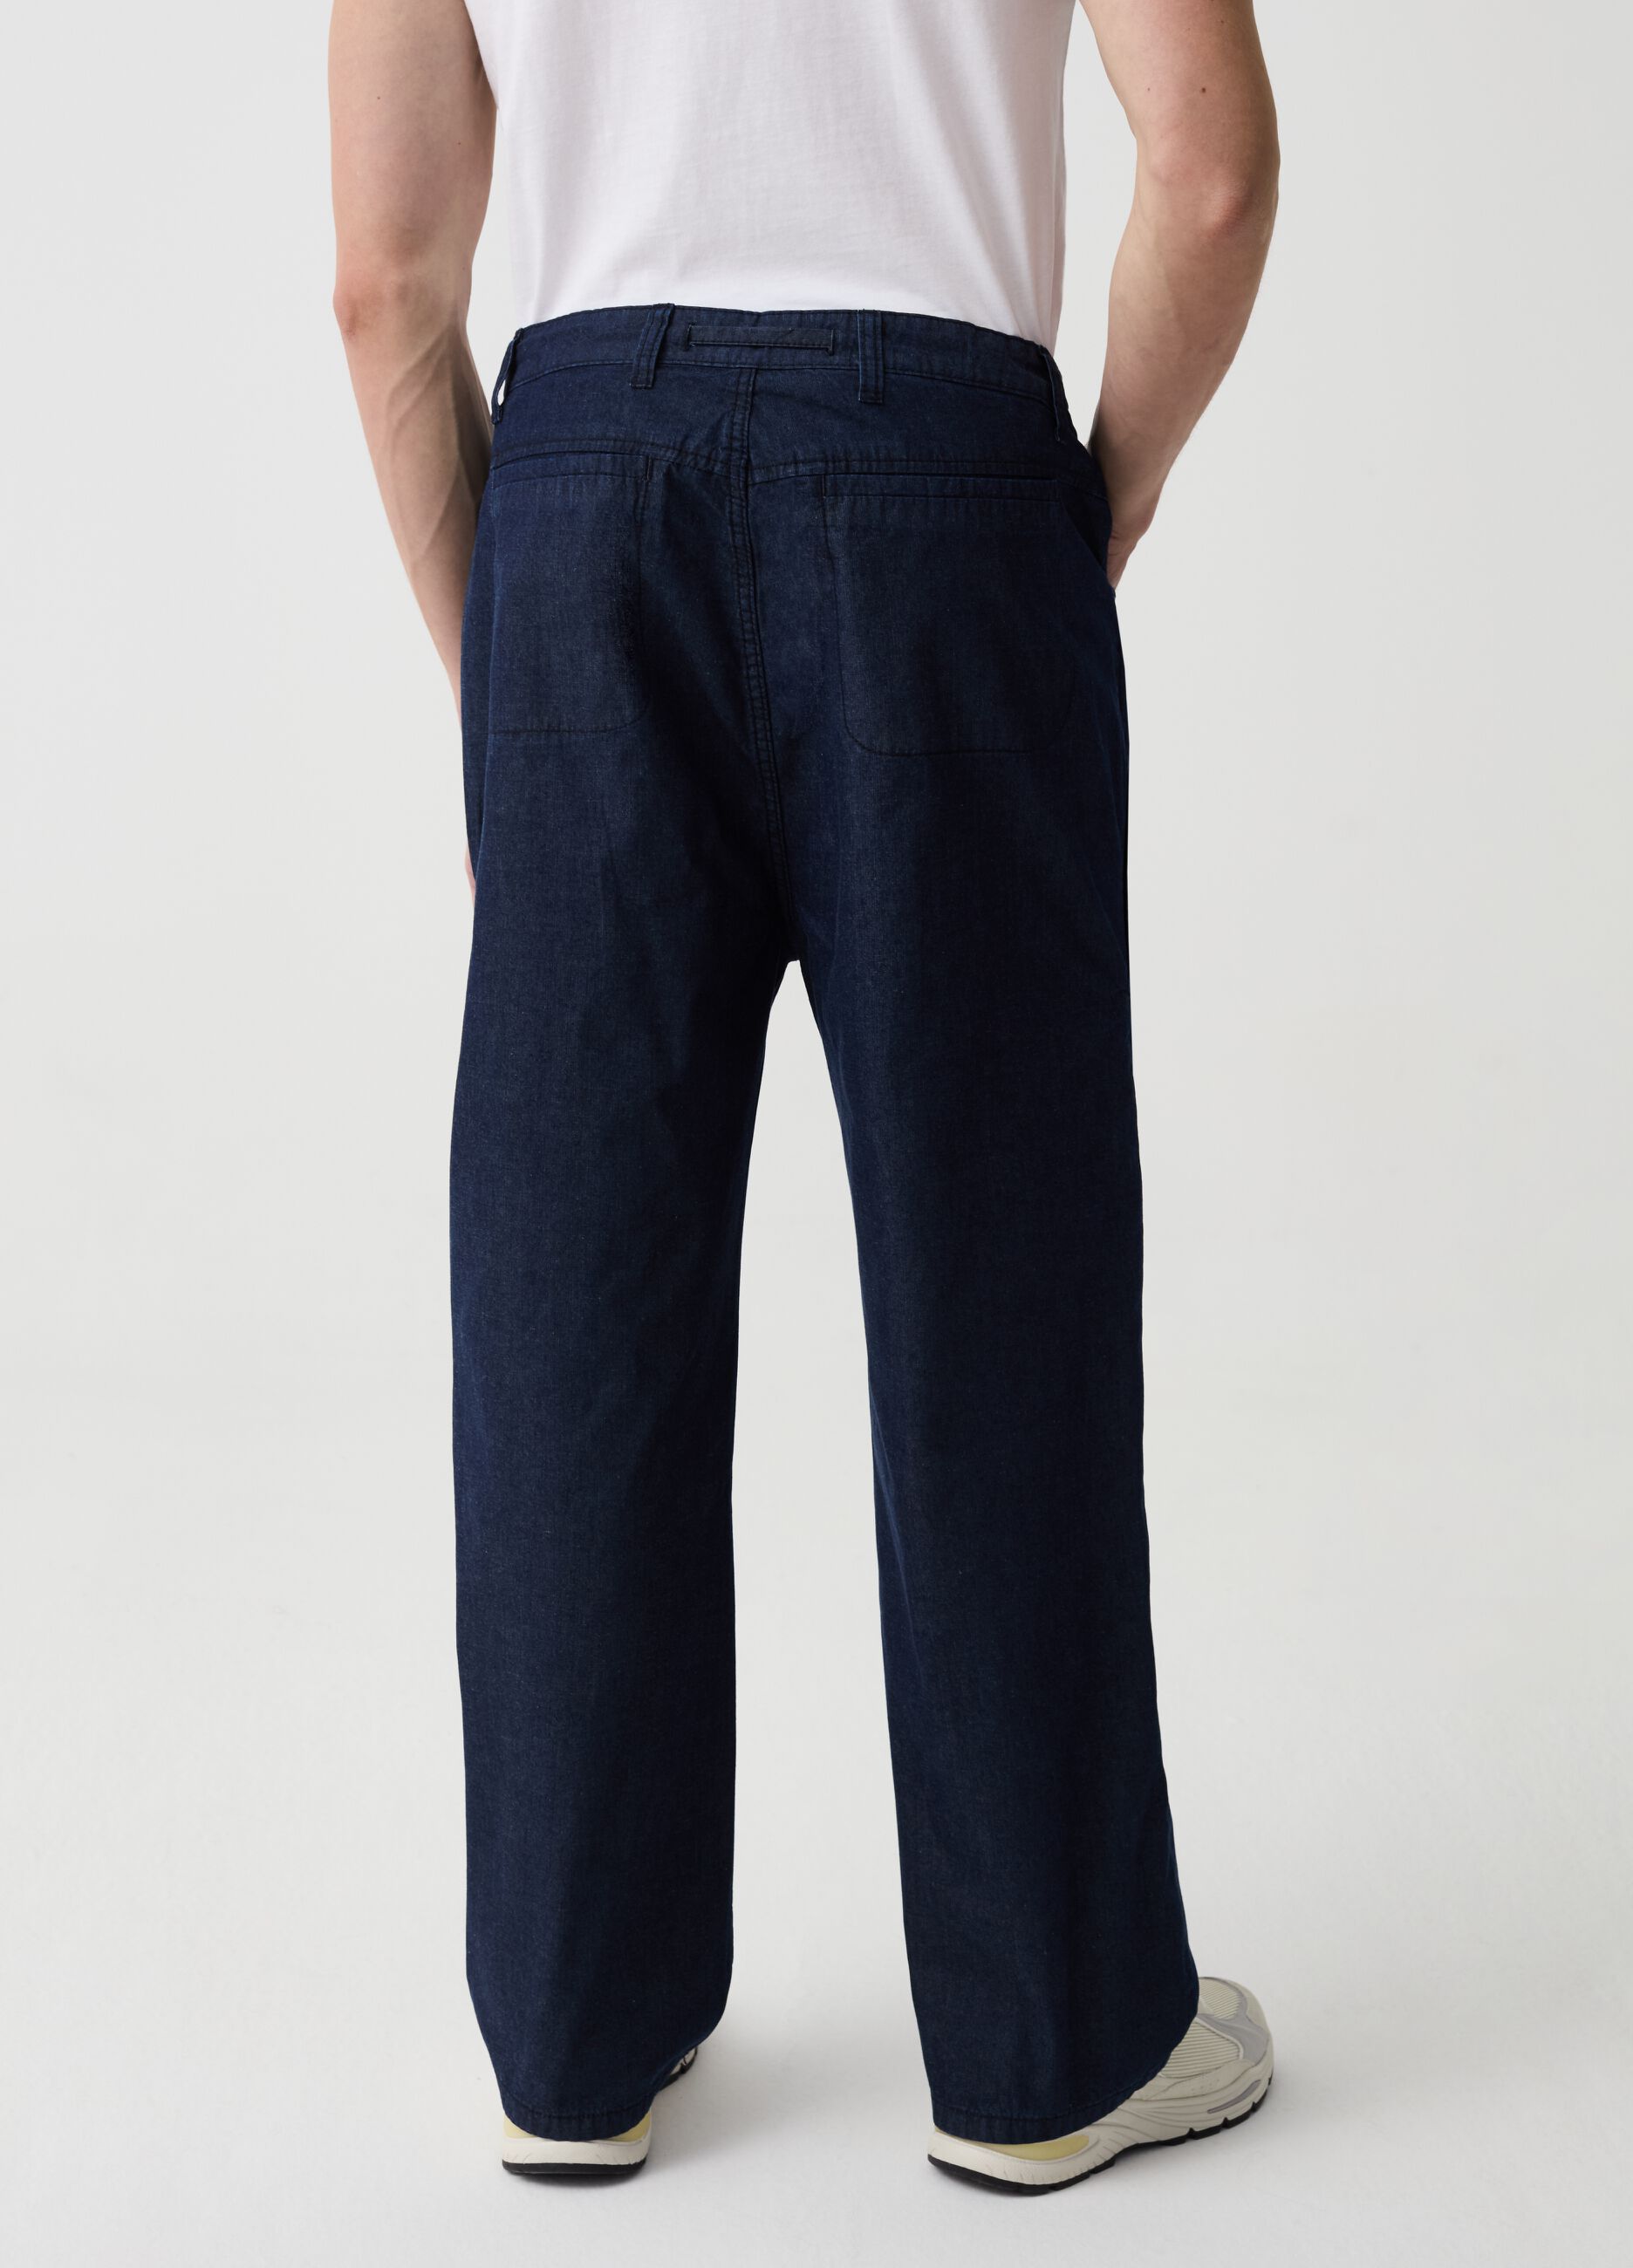 Parachute jeans with drawstring